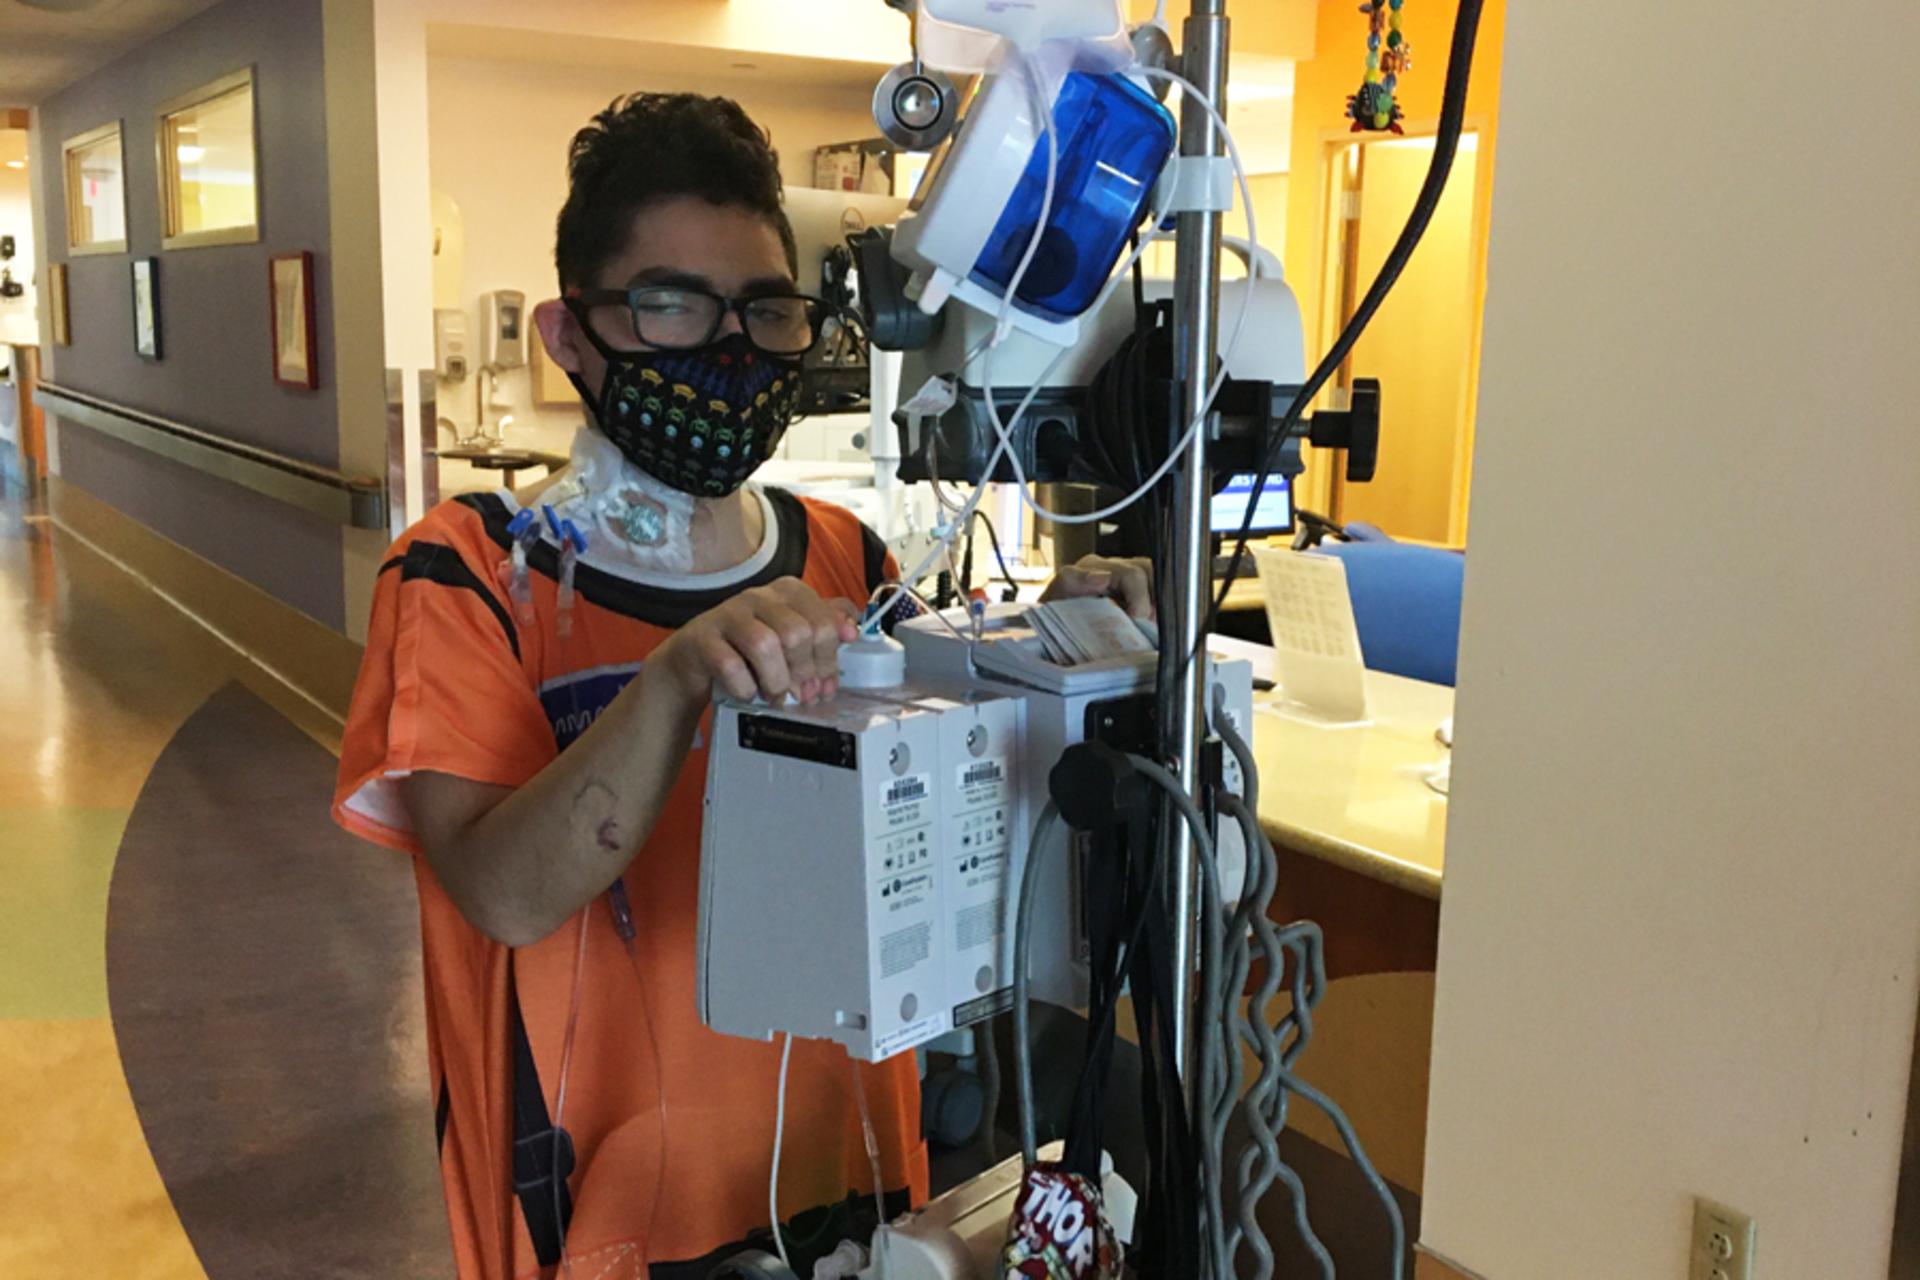 Starlight kid Luke in the hospital hooked up to a respirator 